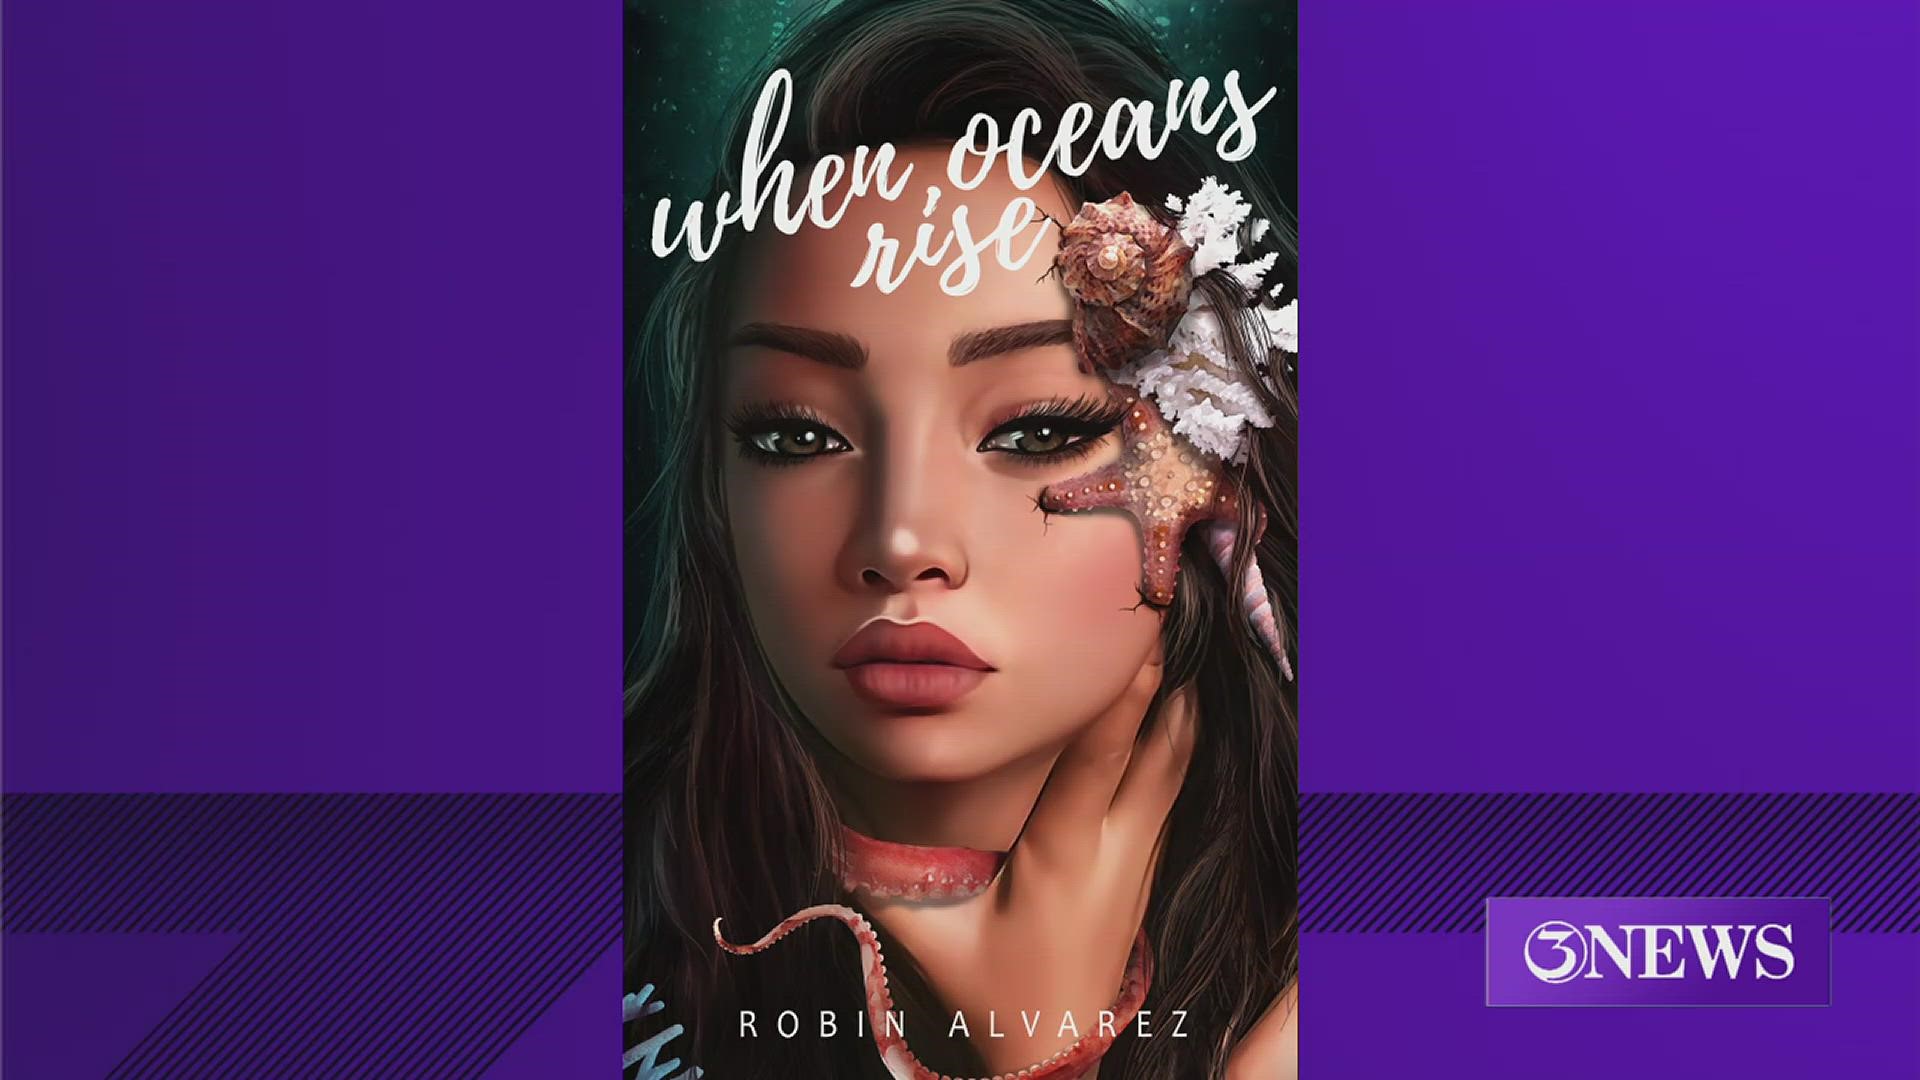 You will read about some familiar locations in Robin Alvarez's debut fairytale retelling, 'When Oceans Rise,' which has already hit a bestseller list on Amazon.